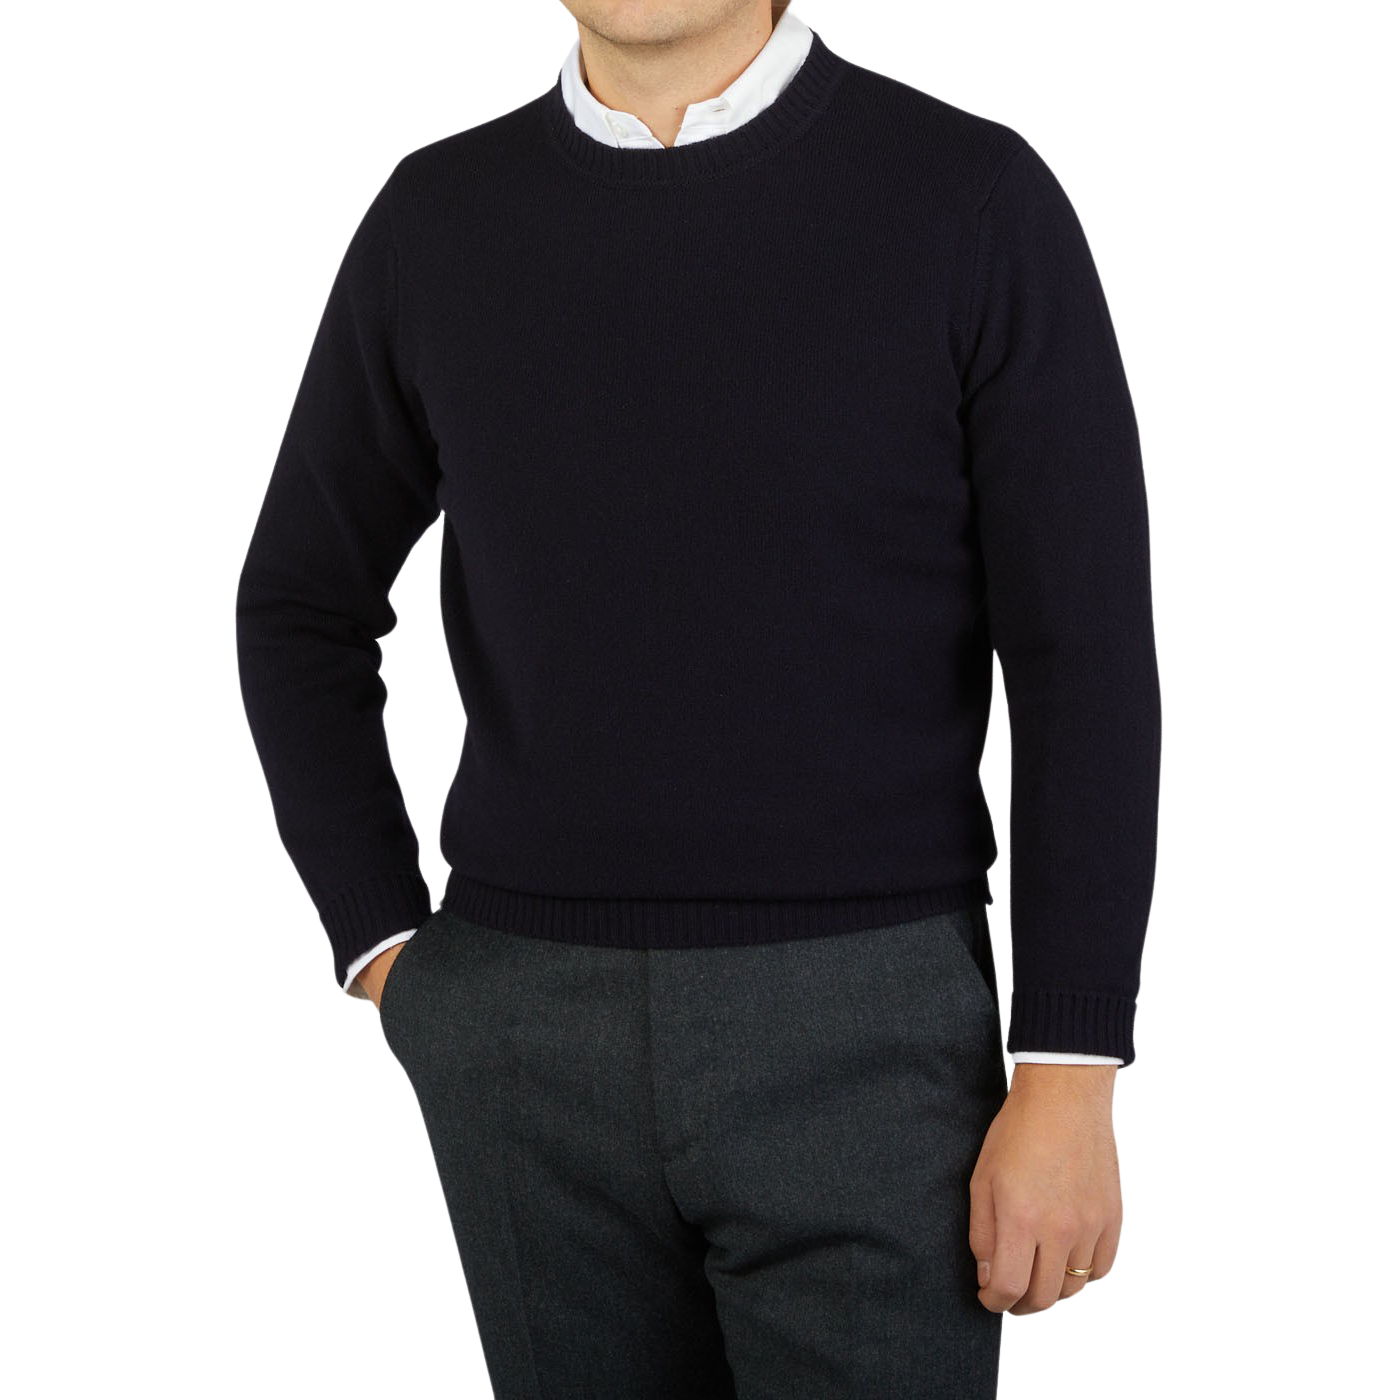 A man donning a William Lockie Navy Crewneck Lambswool Sweater.